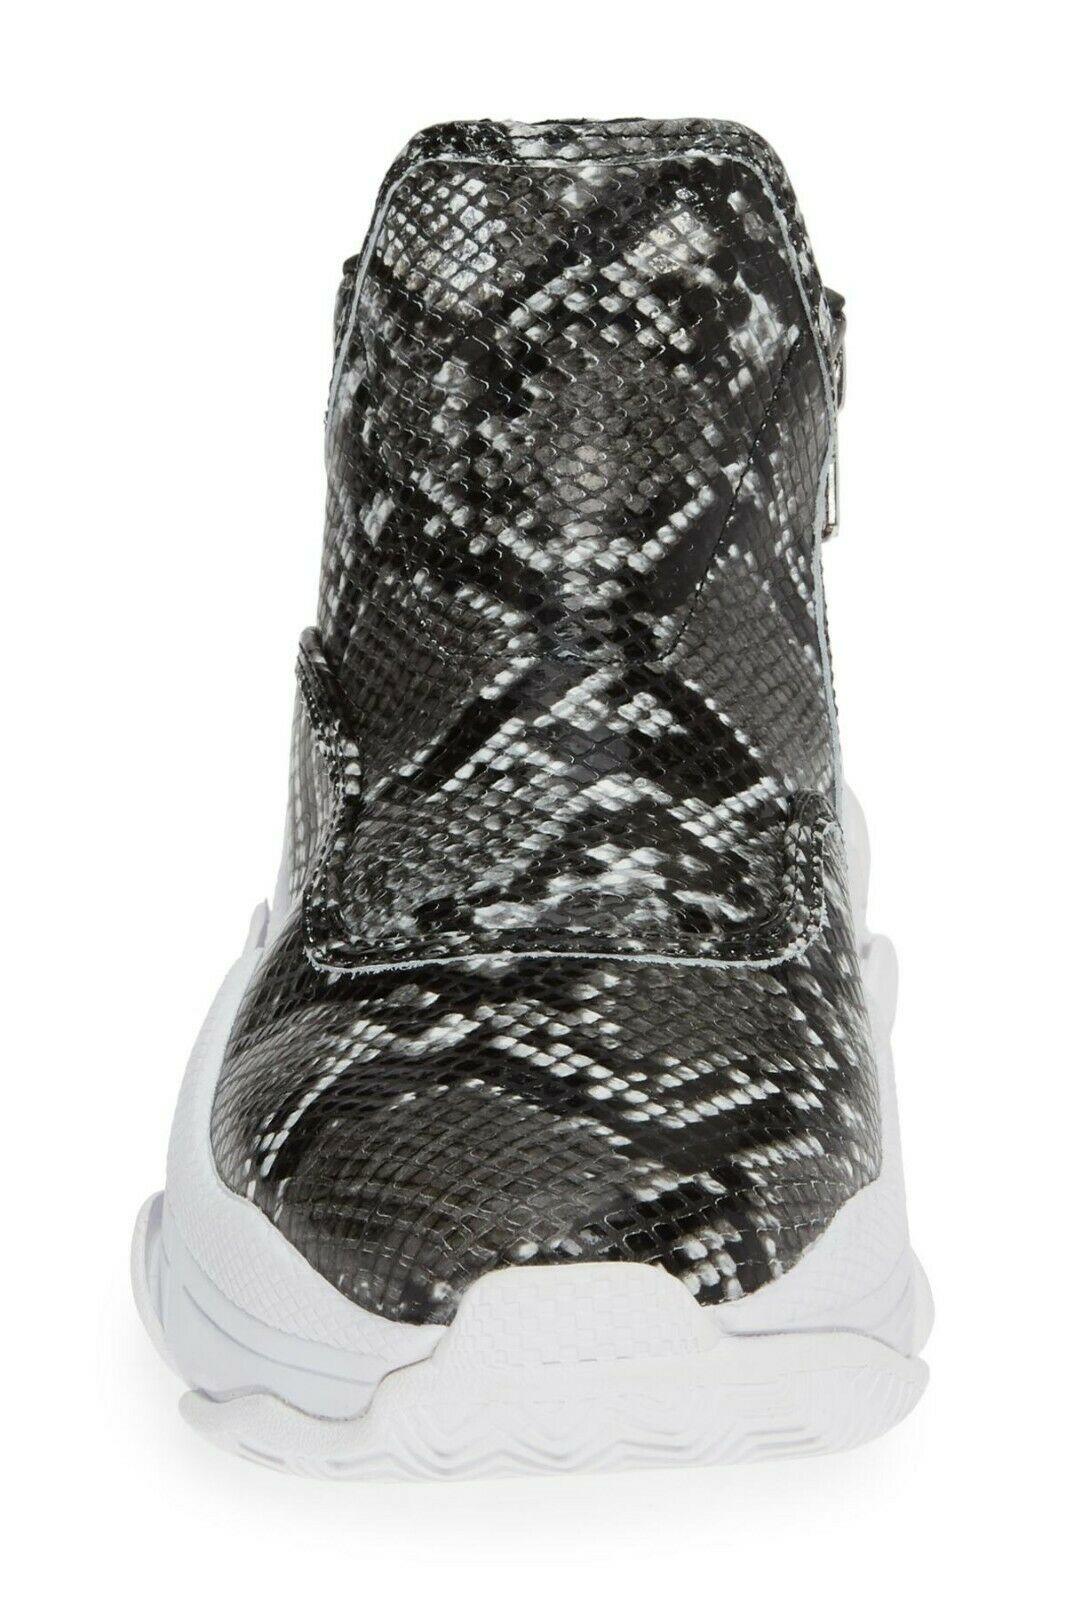 Jeffrey Campbell CTRL-DEL Womens Fashion Sneakers Snake Embossed Size US 8.5 - SVNYFancy